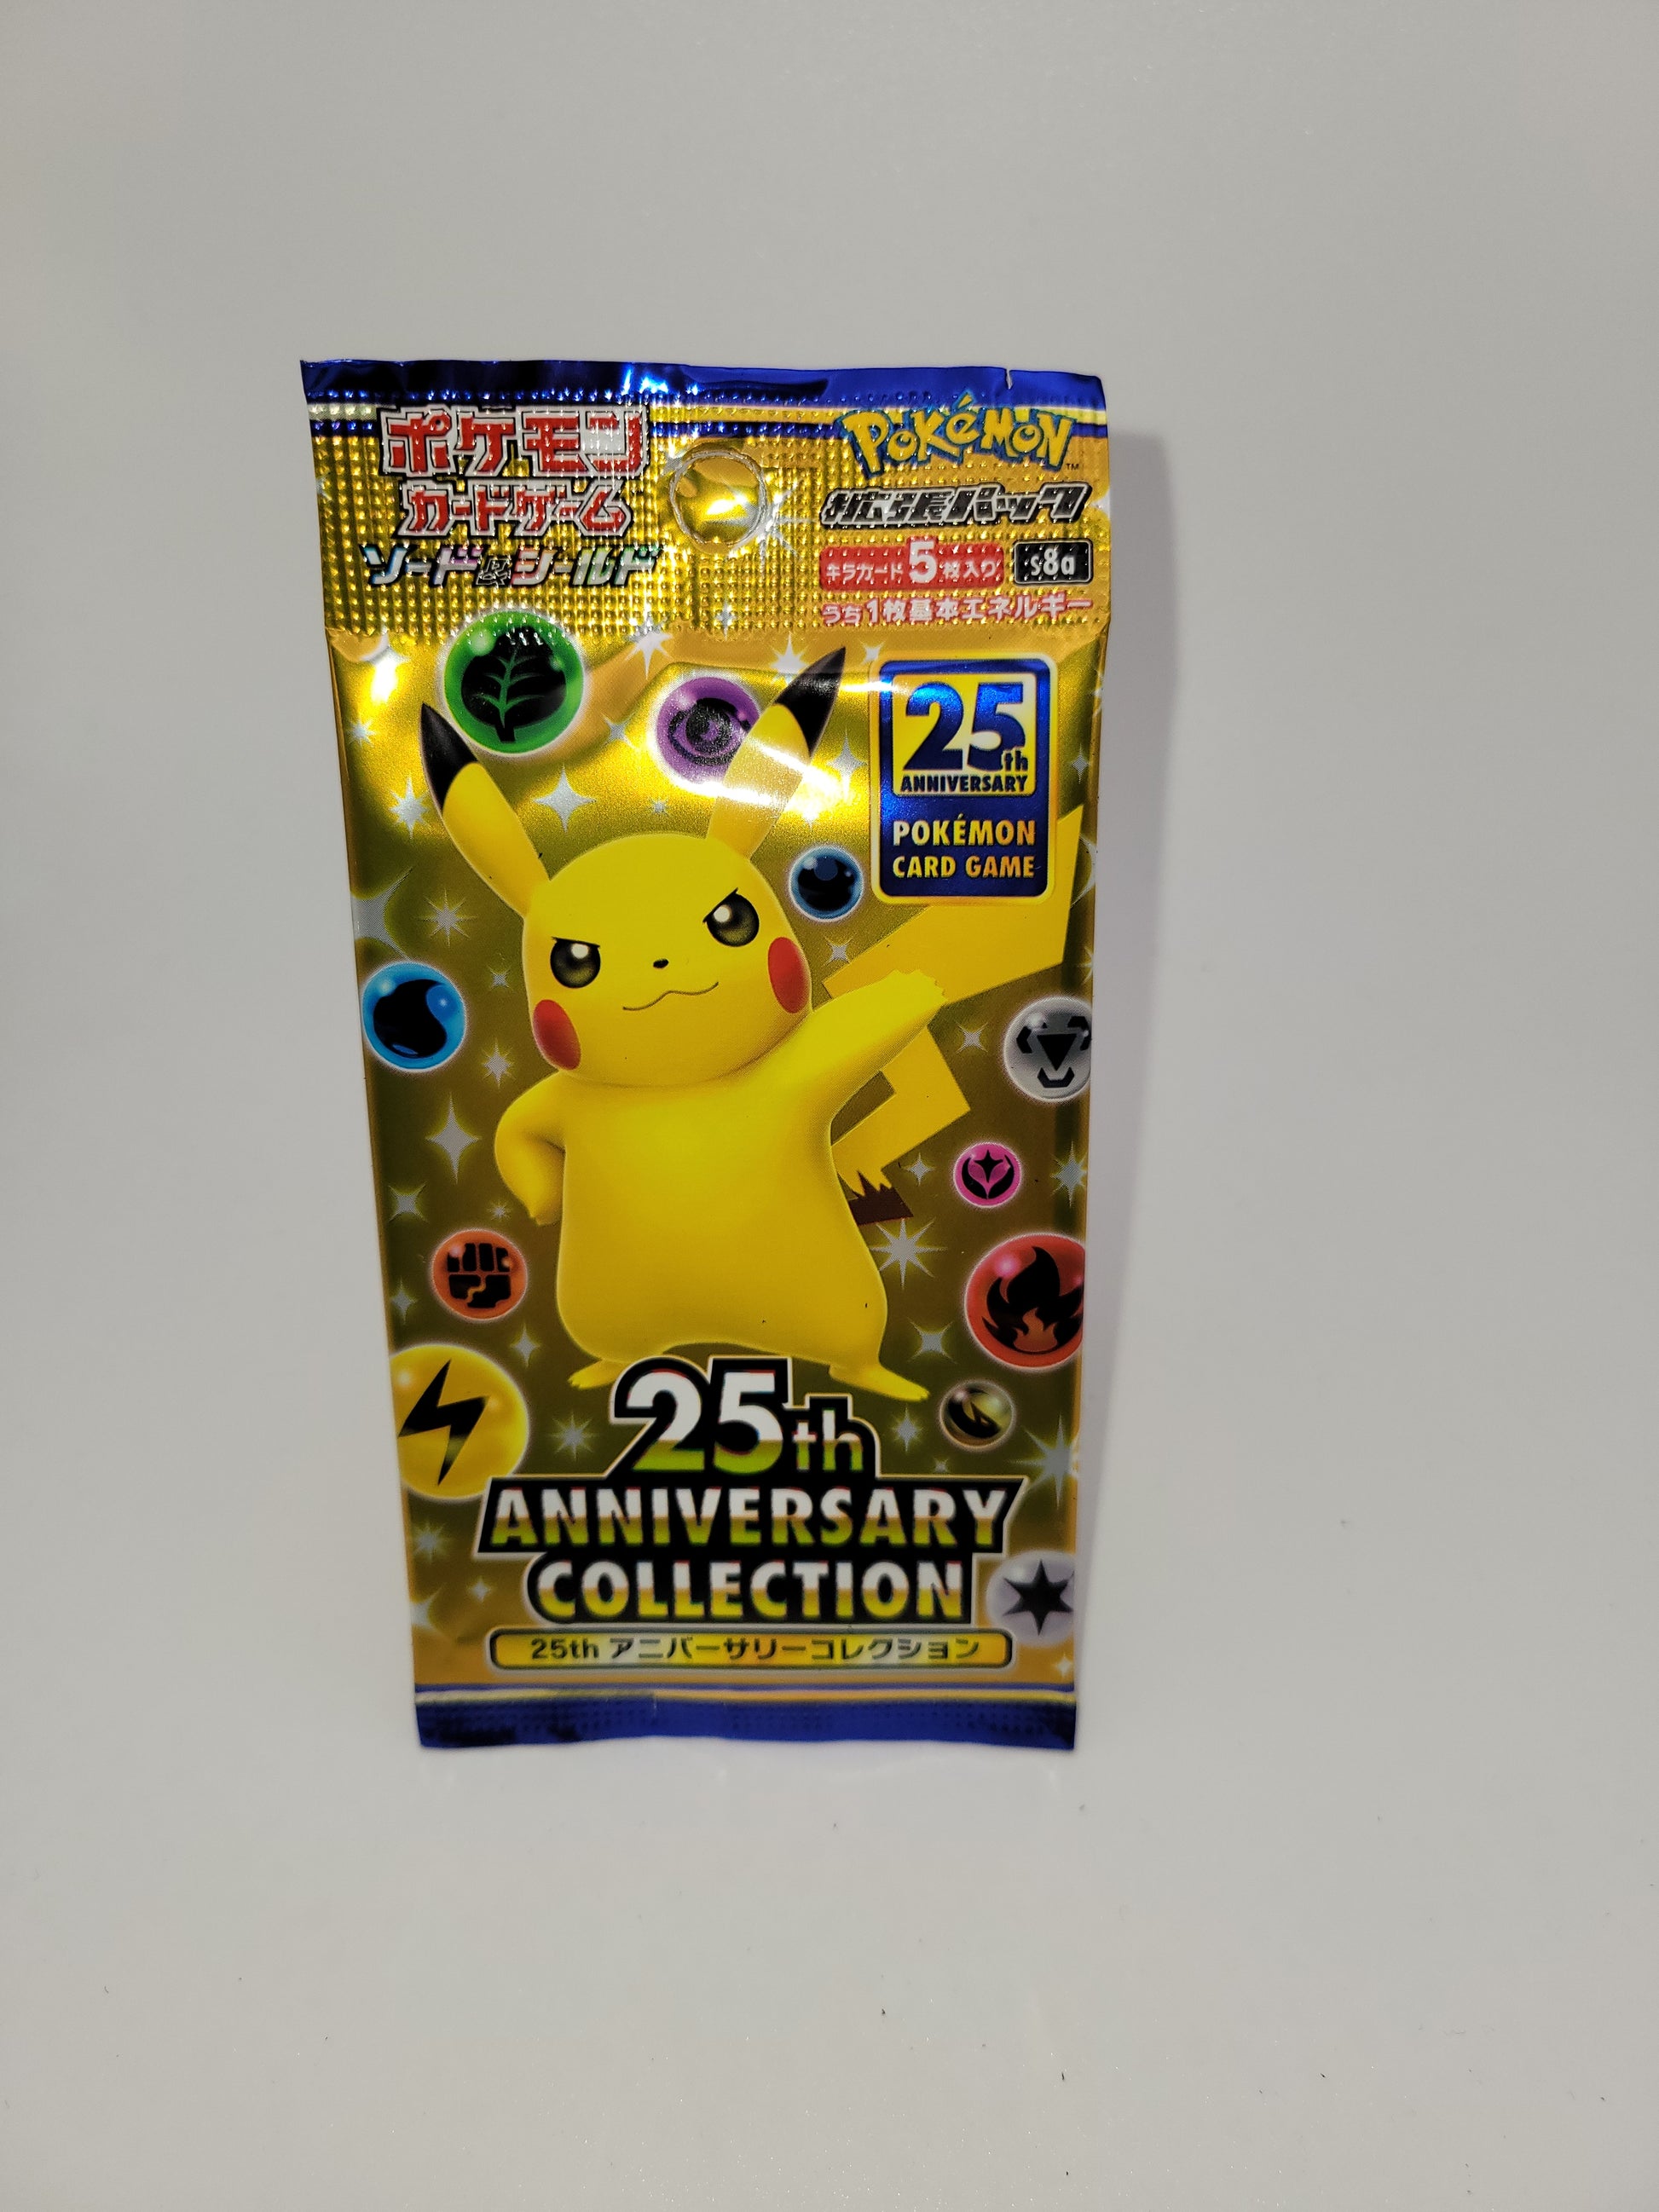 Each Japanese 25th anniversary Celebrations pack includes 5 cards.